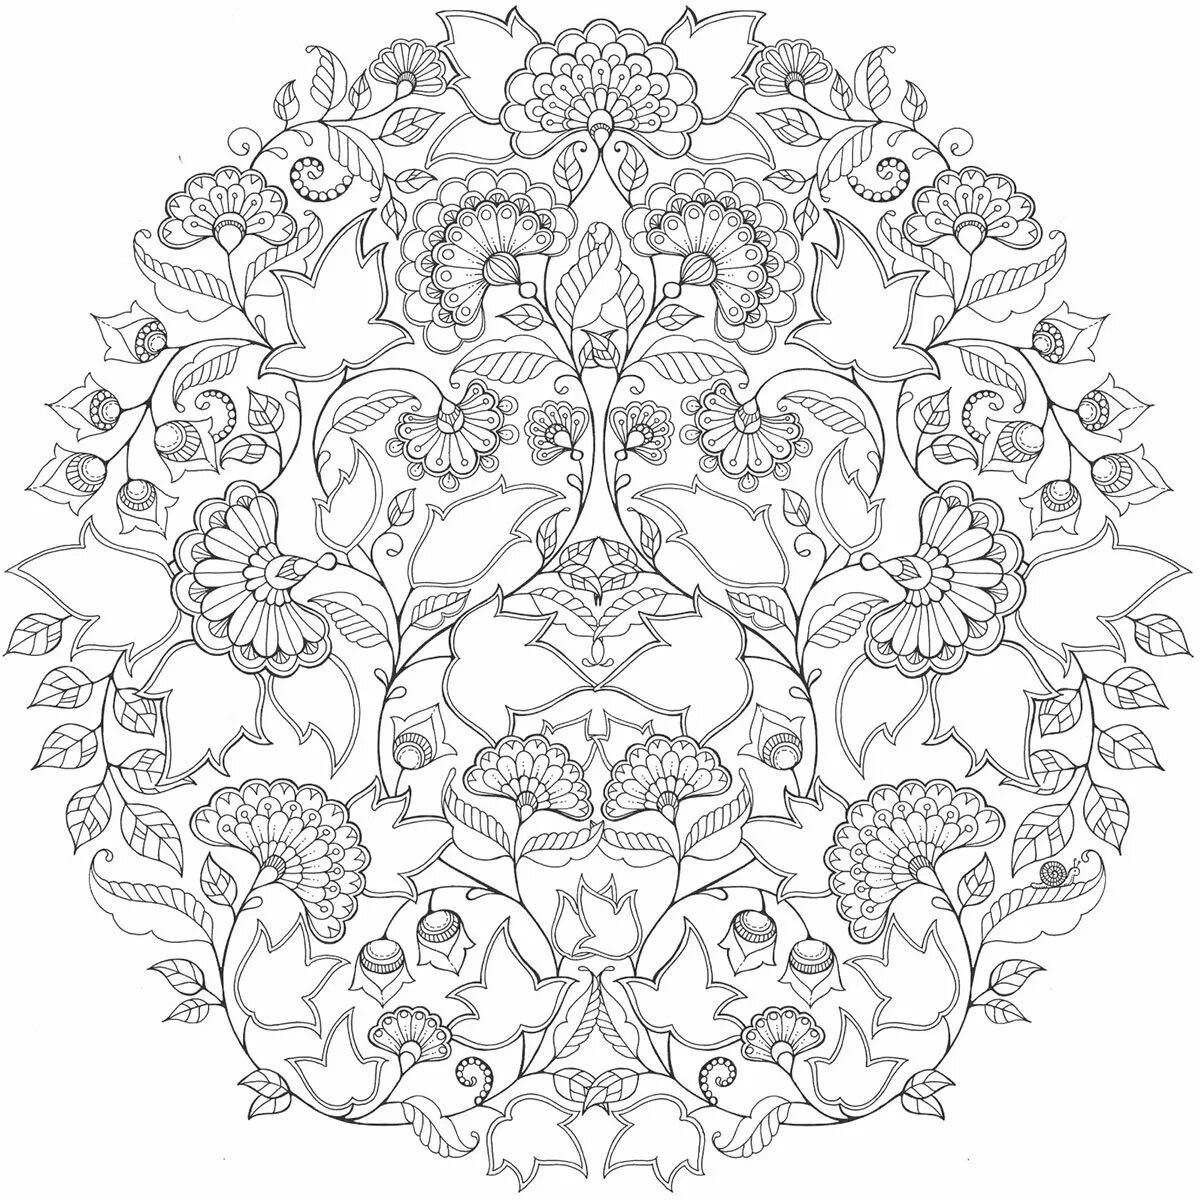 Sparkly patterns coloring pages magic